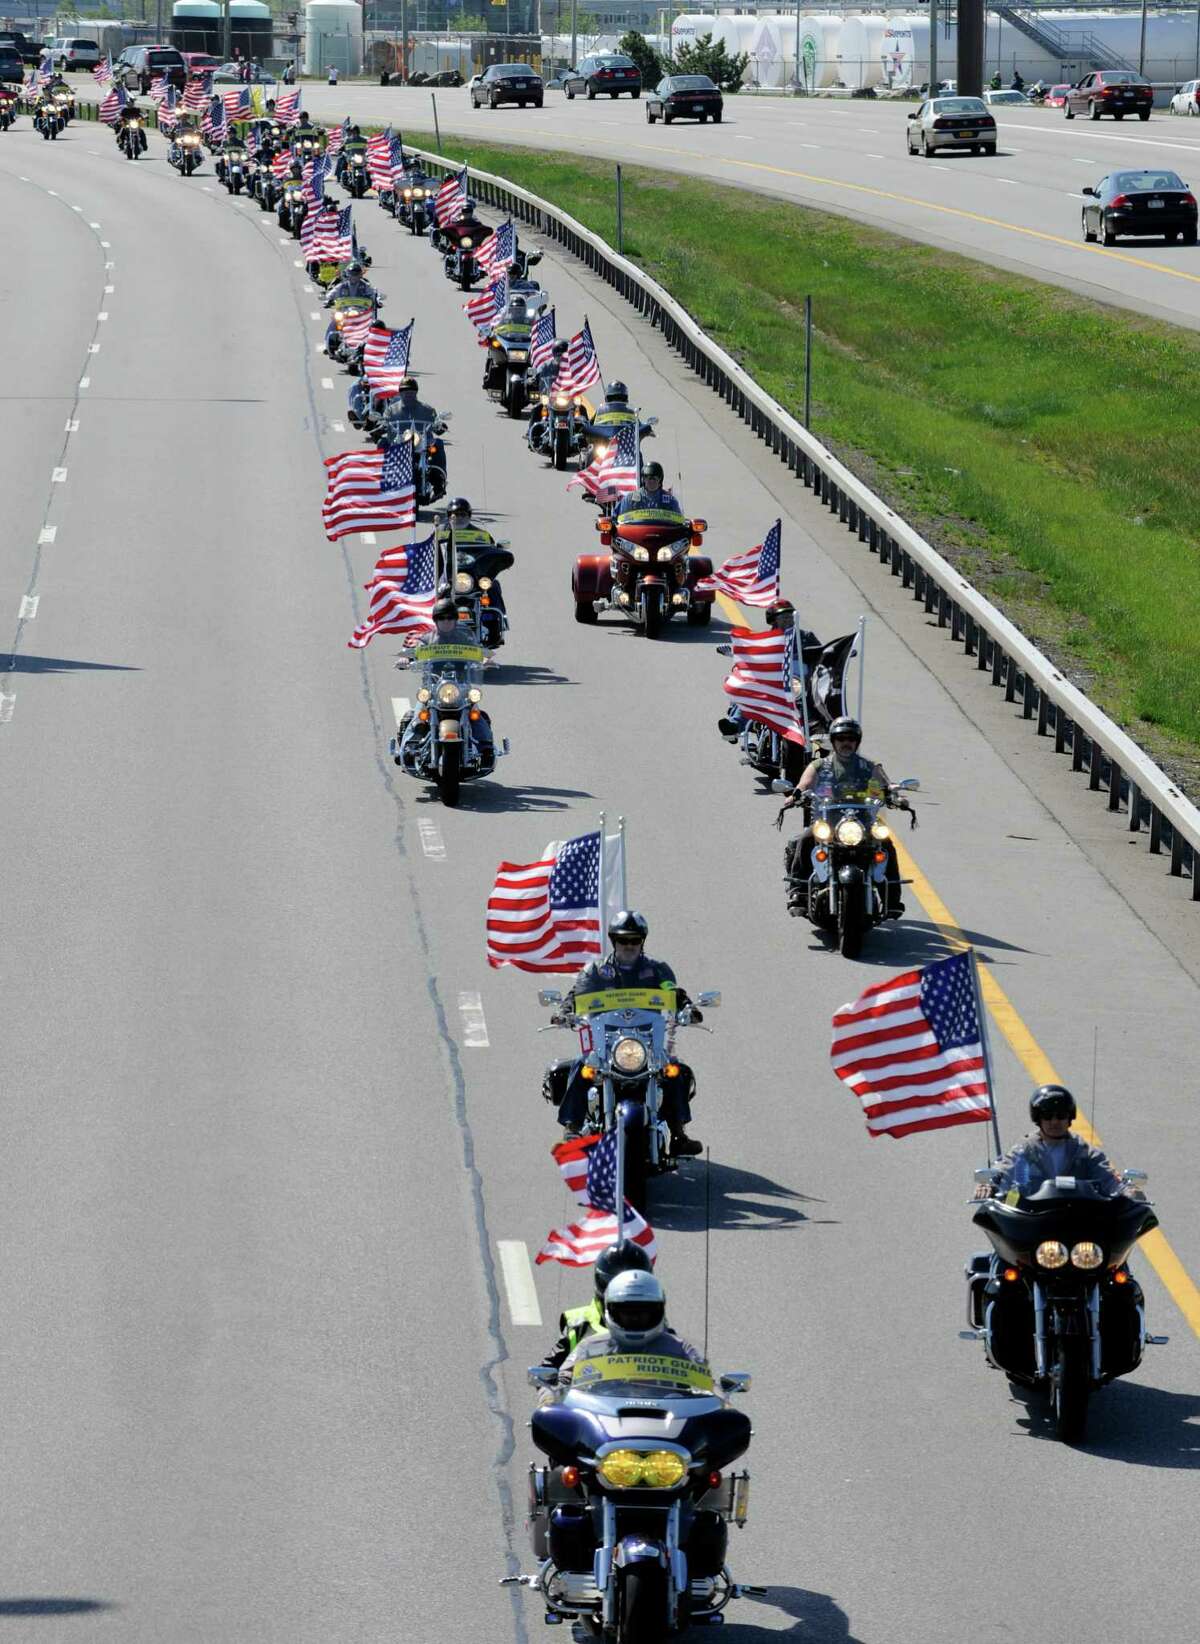 Patriot riders on motorcycles lead the funeral procession of U.S. Army nurse Capt. Bruce Kevin Clark who died in Afghanistan following Military honors at Rochester International Airport Saturday, May 12, 2012.